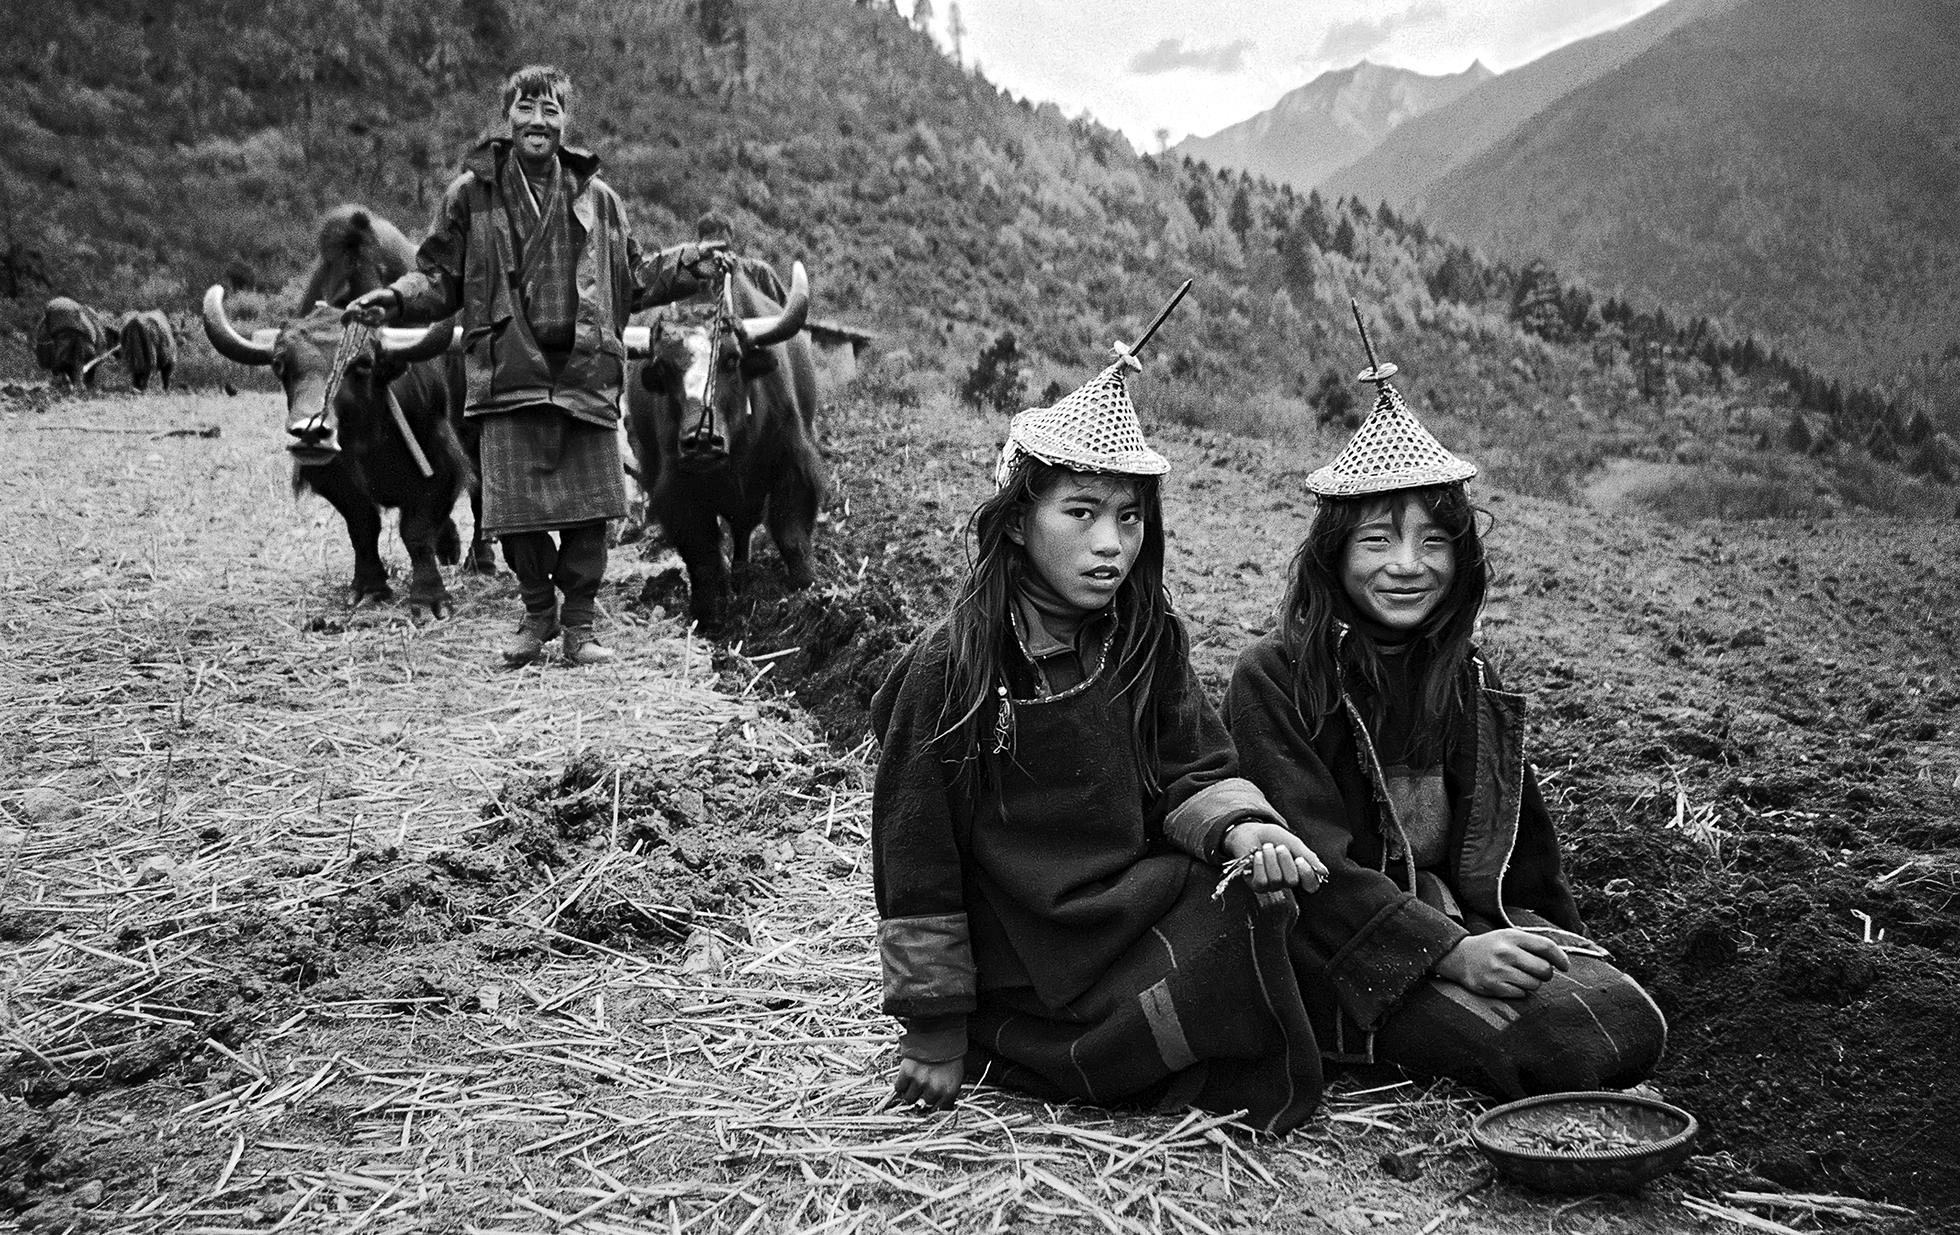 Two Bhutanese women sit among a barley field as they glean it by hand. Behind them, a Bhutanese man approaches them with two oxen.